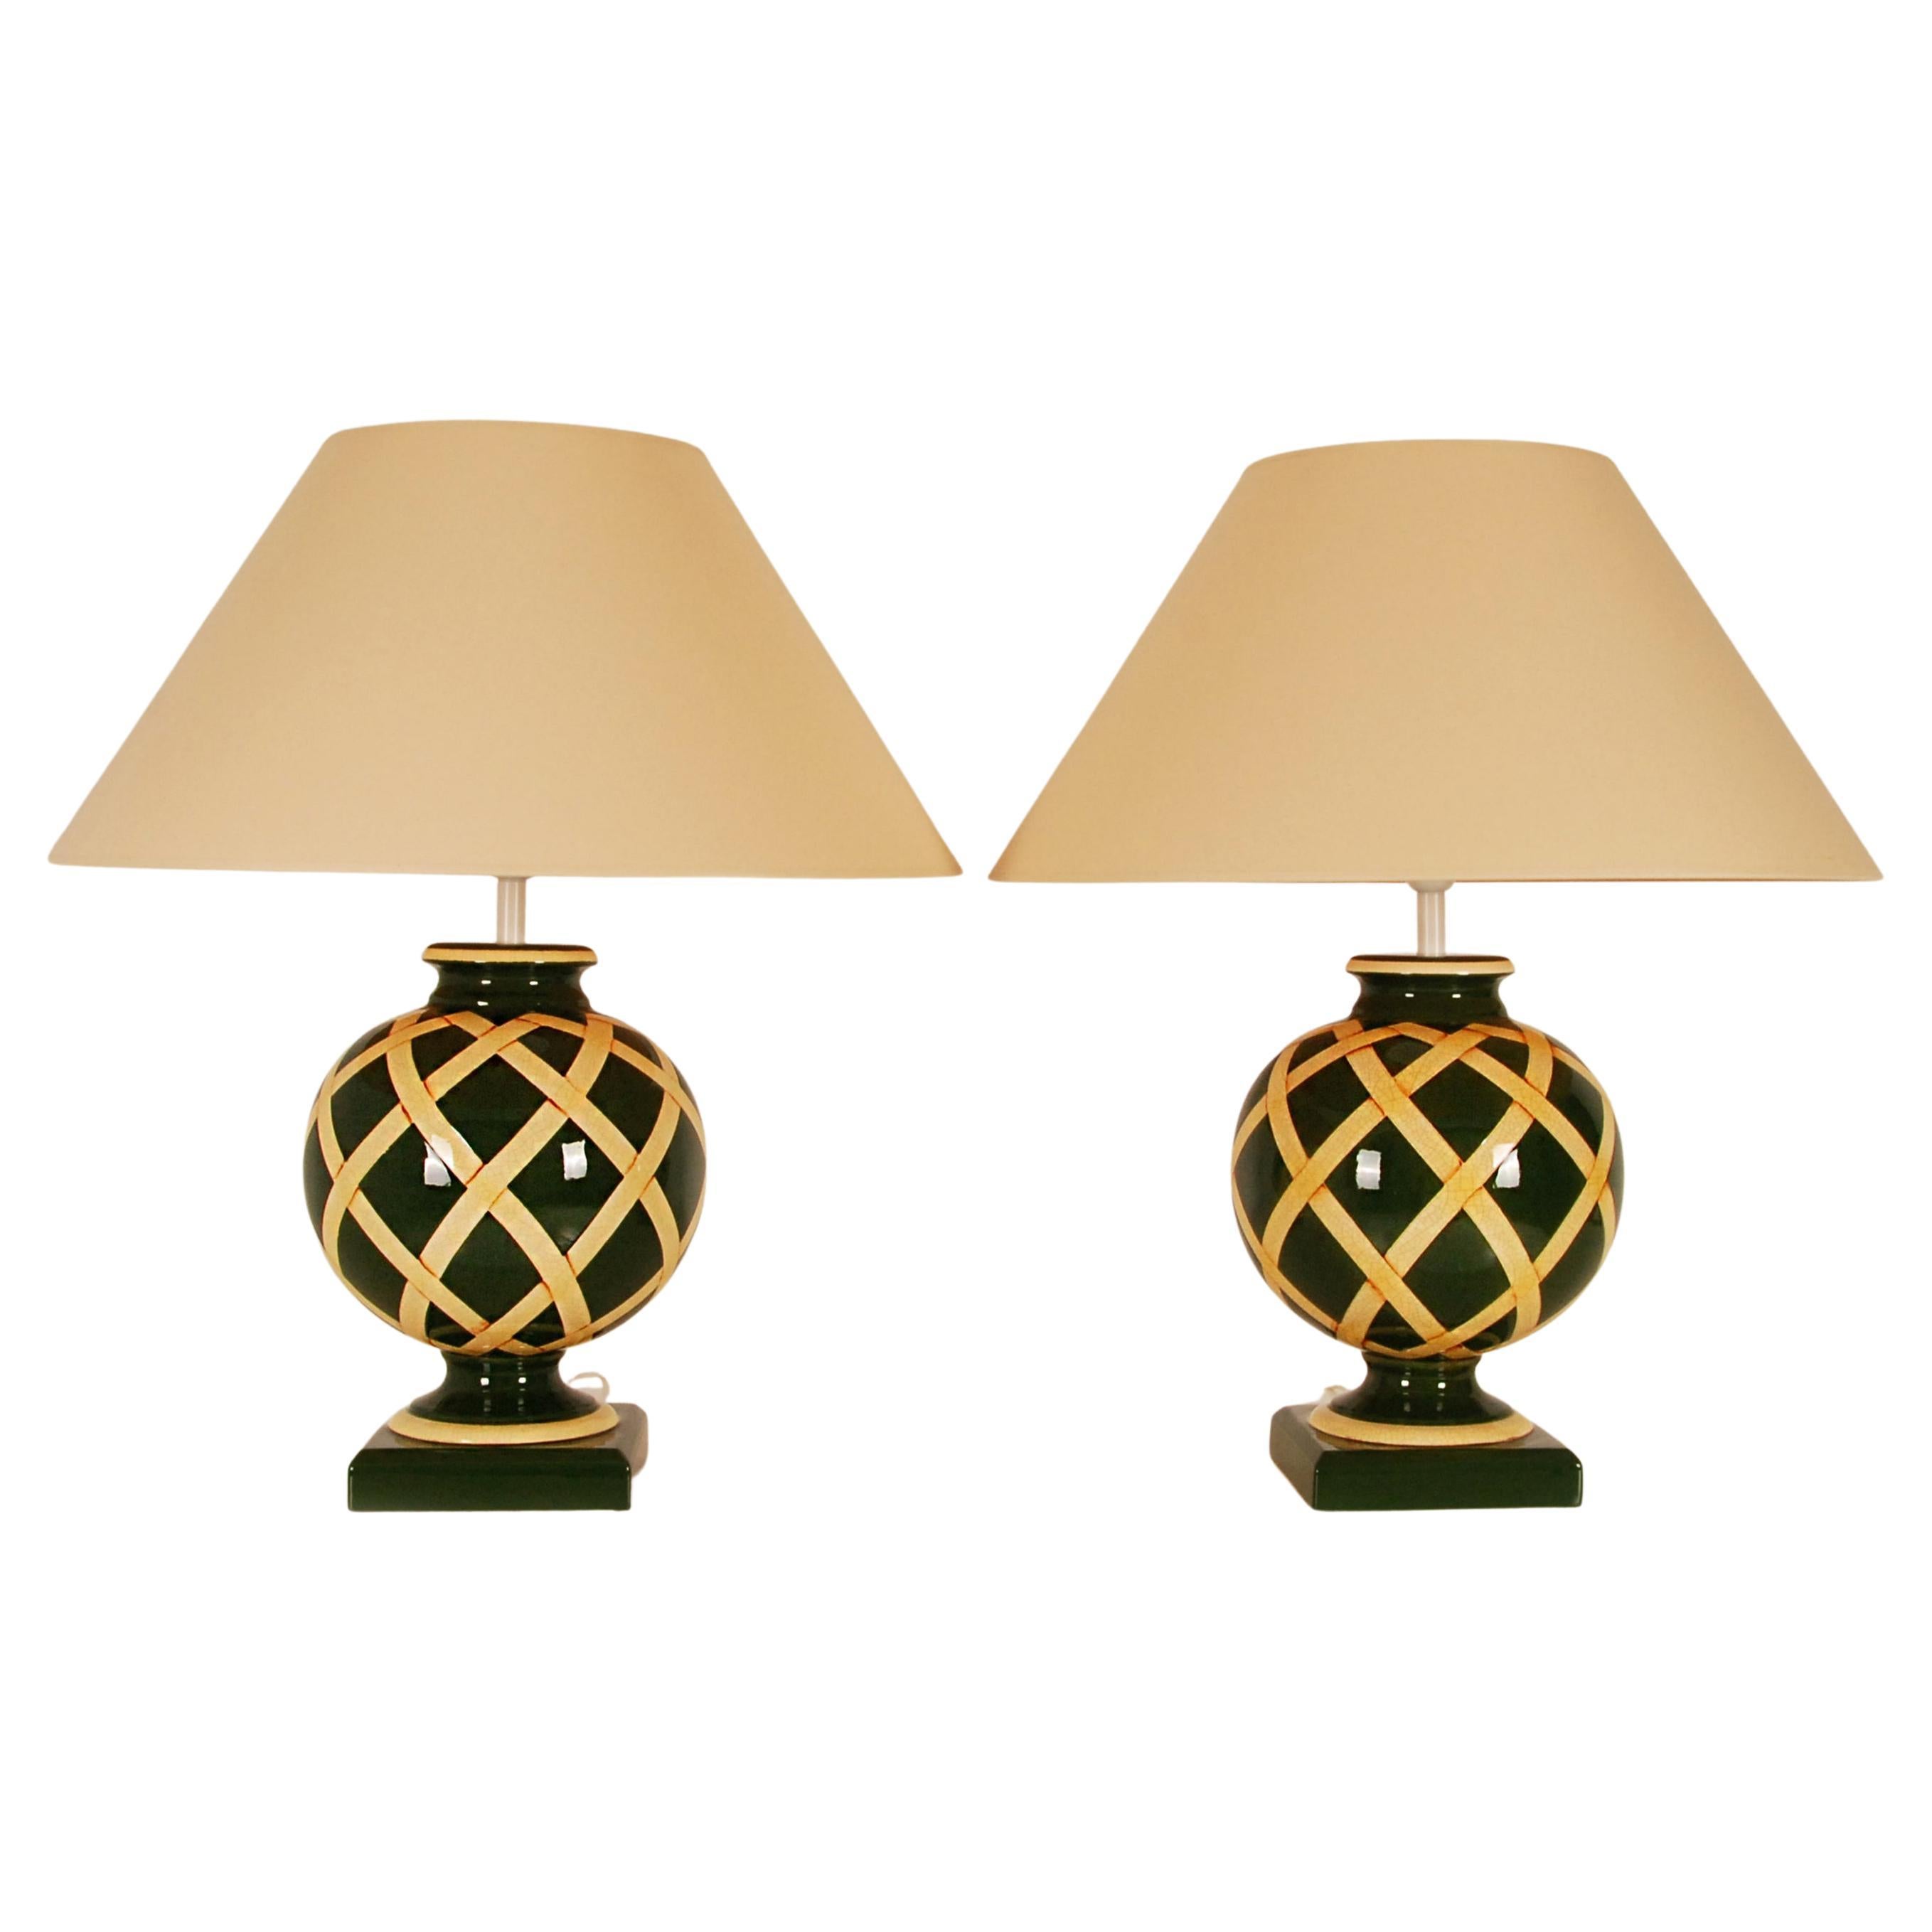 Vintage French Ceramic Vase Table Lamps Green Beige Argyle Pattern, a Pair For Sale